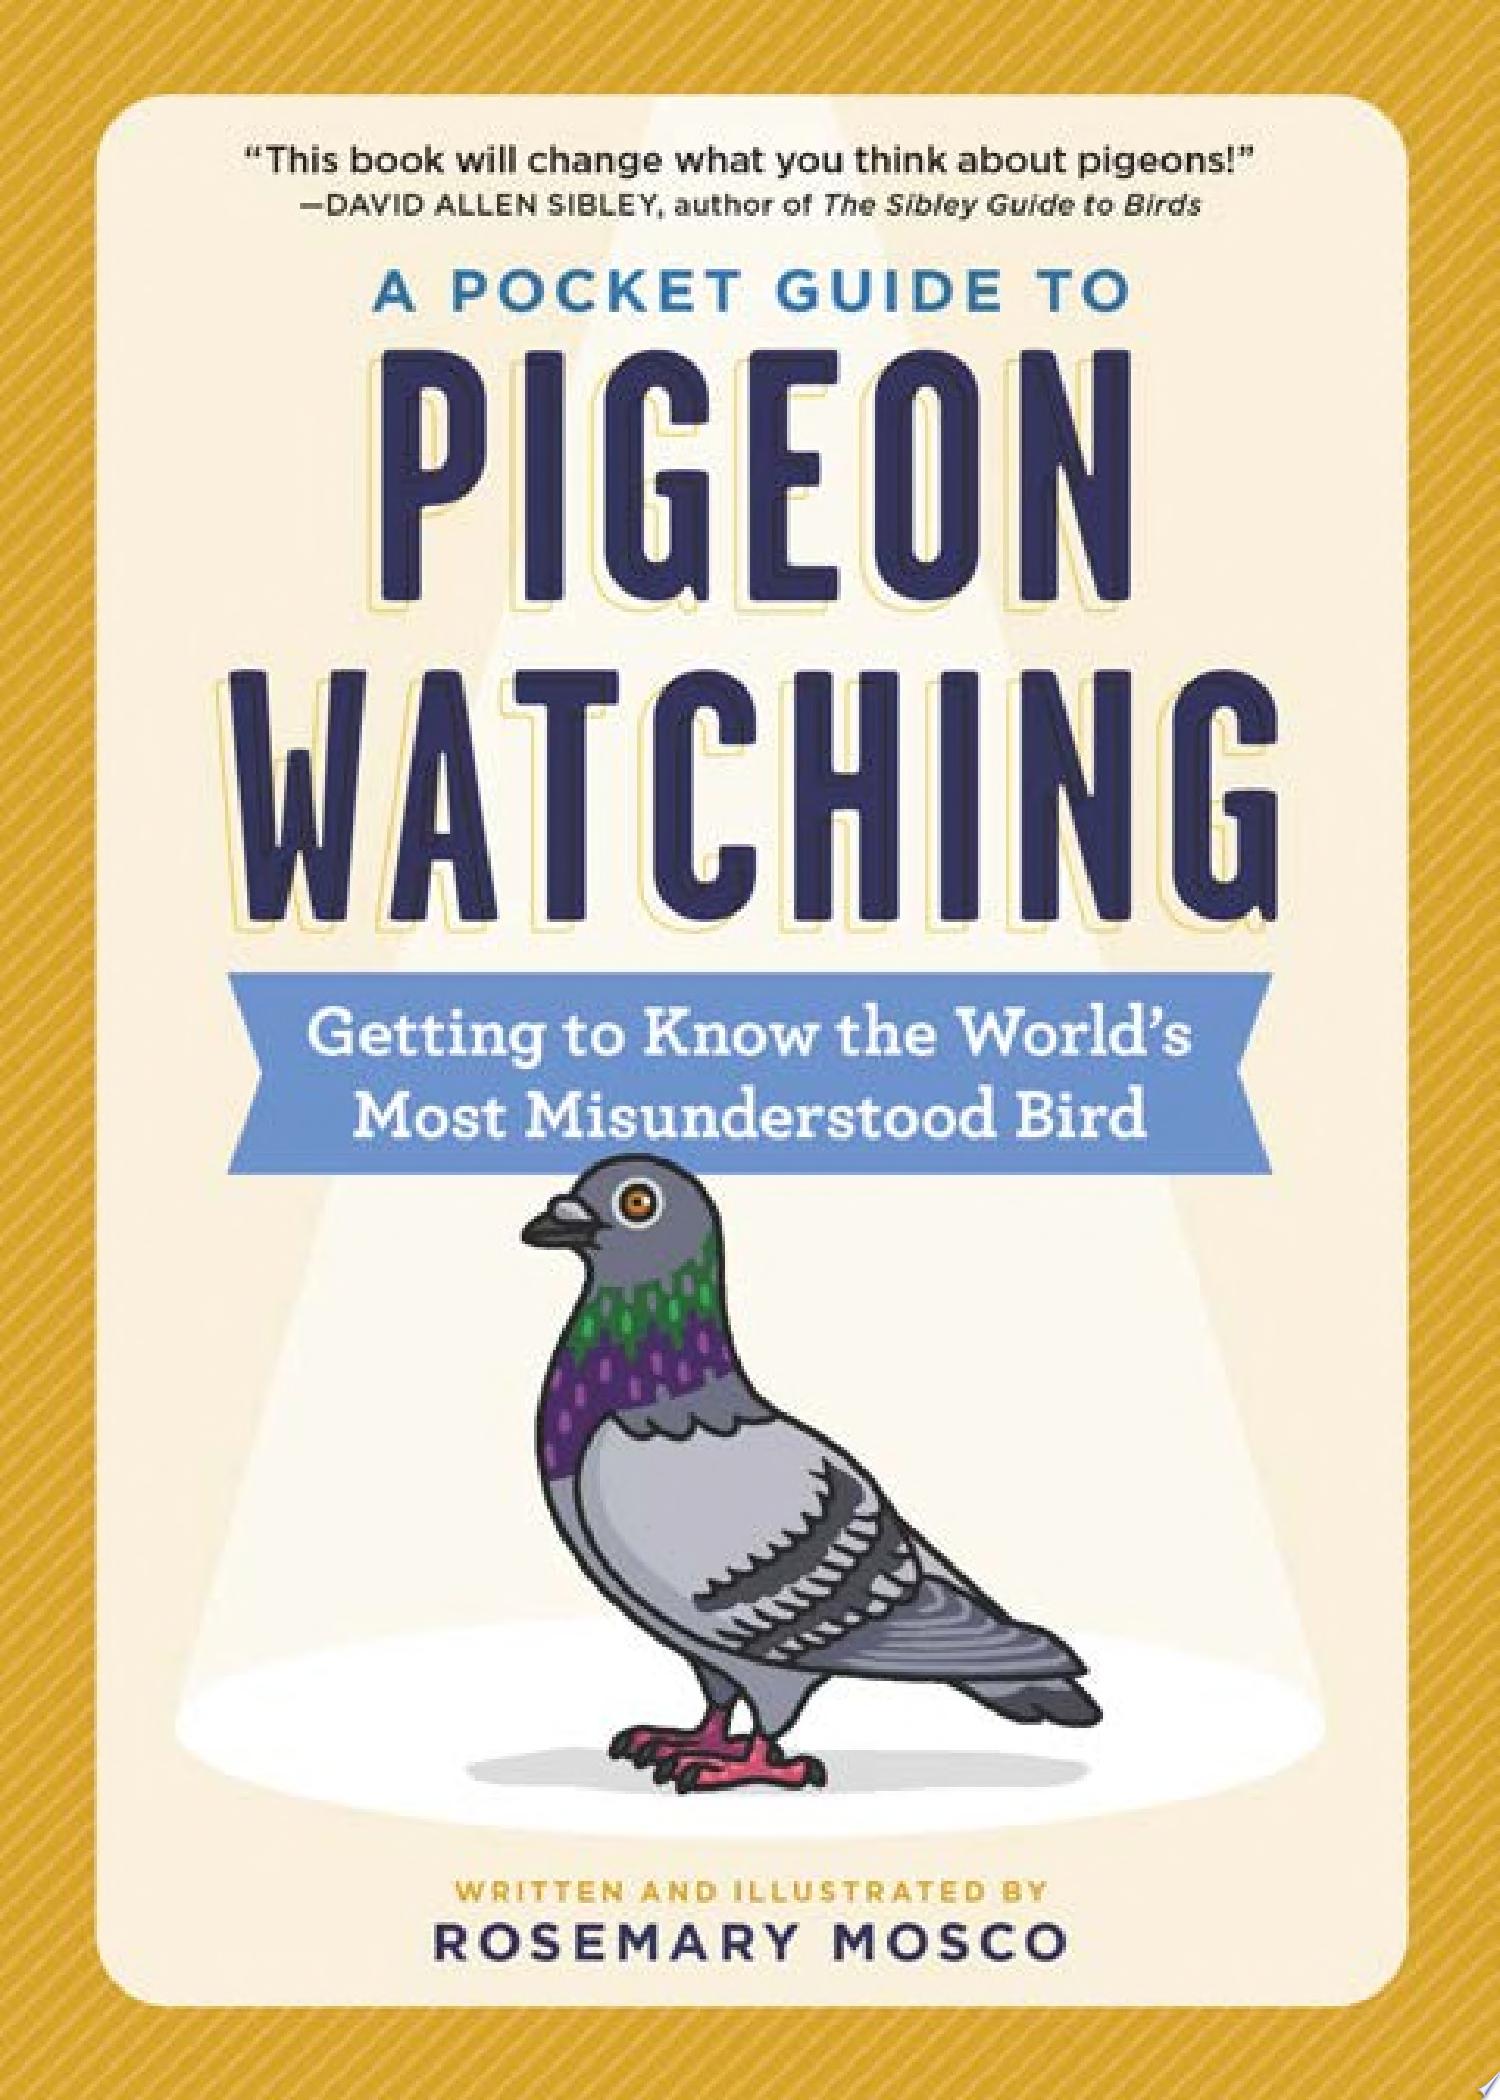 Image for "A Pocket Guide to Pigeon Watching"